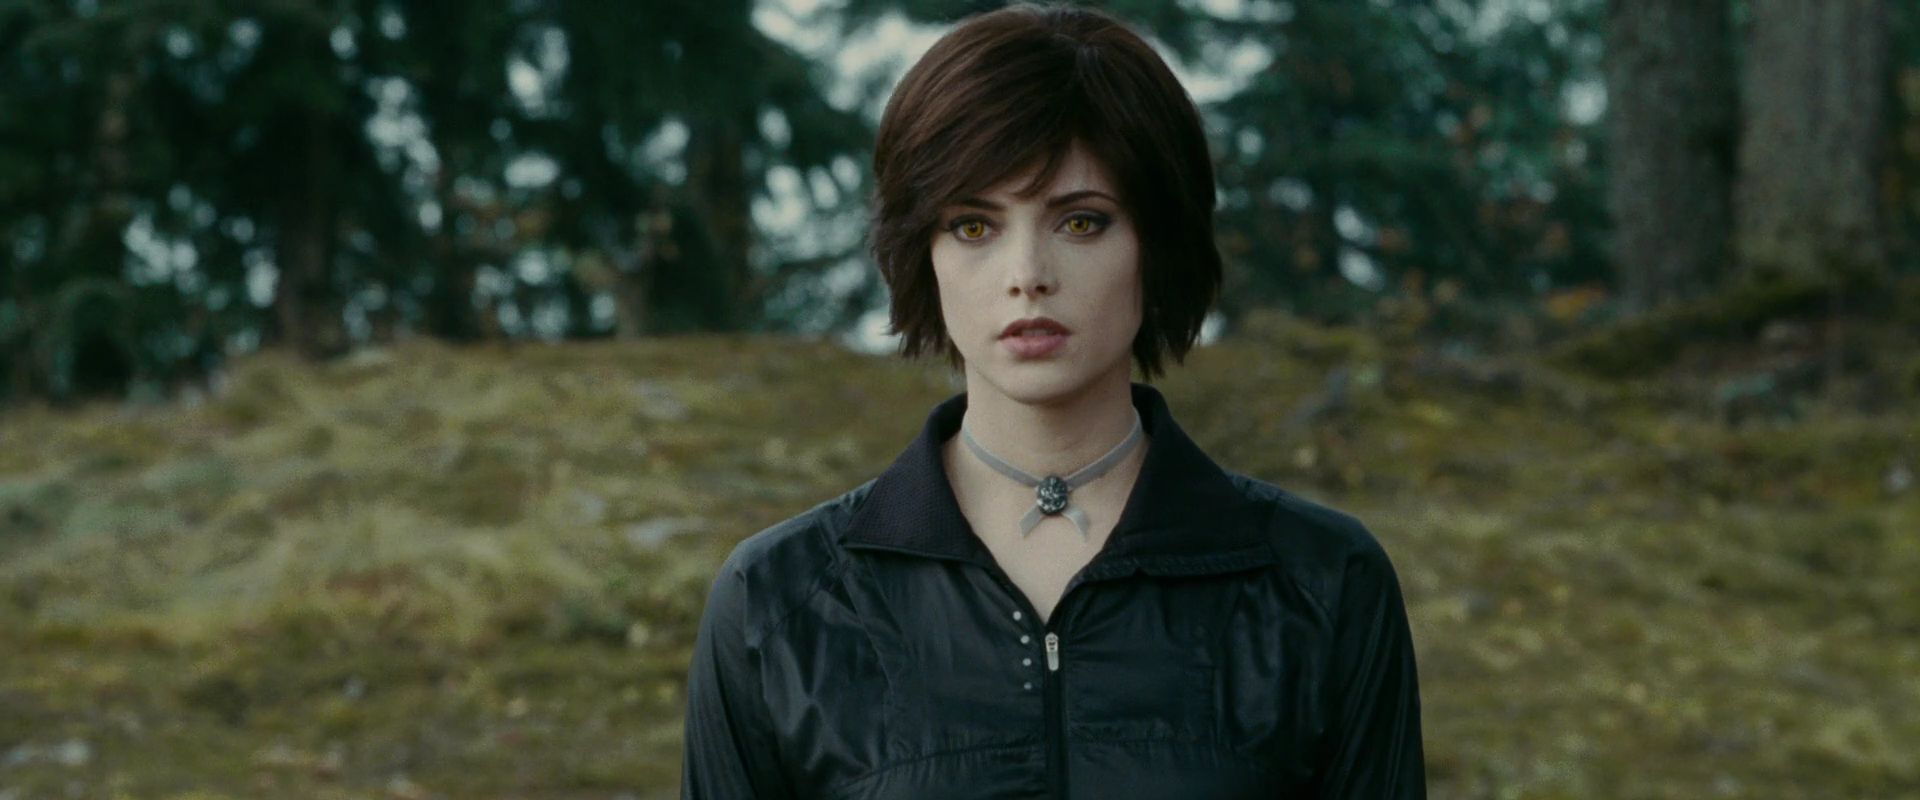 alice cullen, images, image, wallpaper, photos, photo, photograph, gallery,...